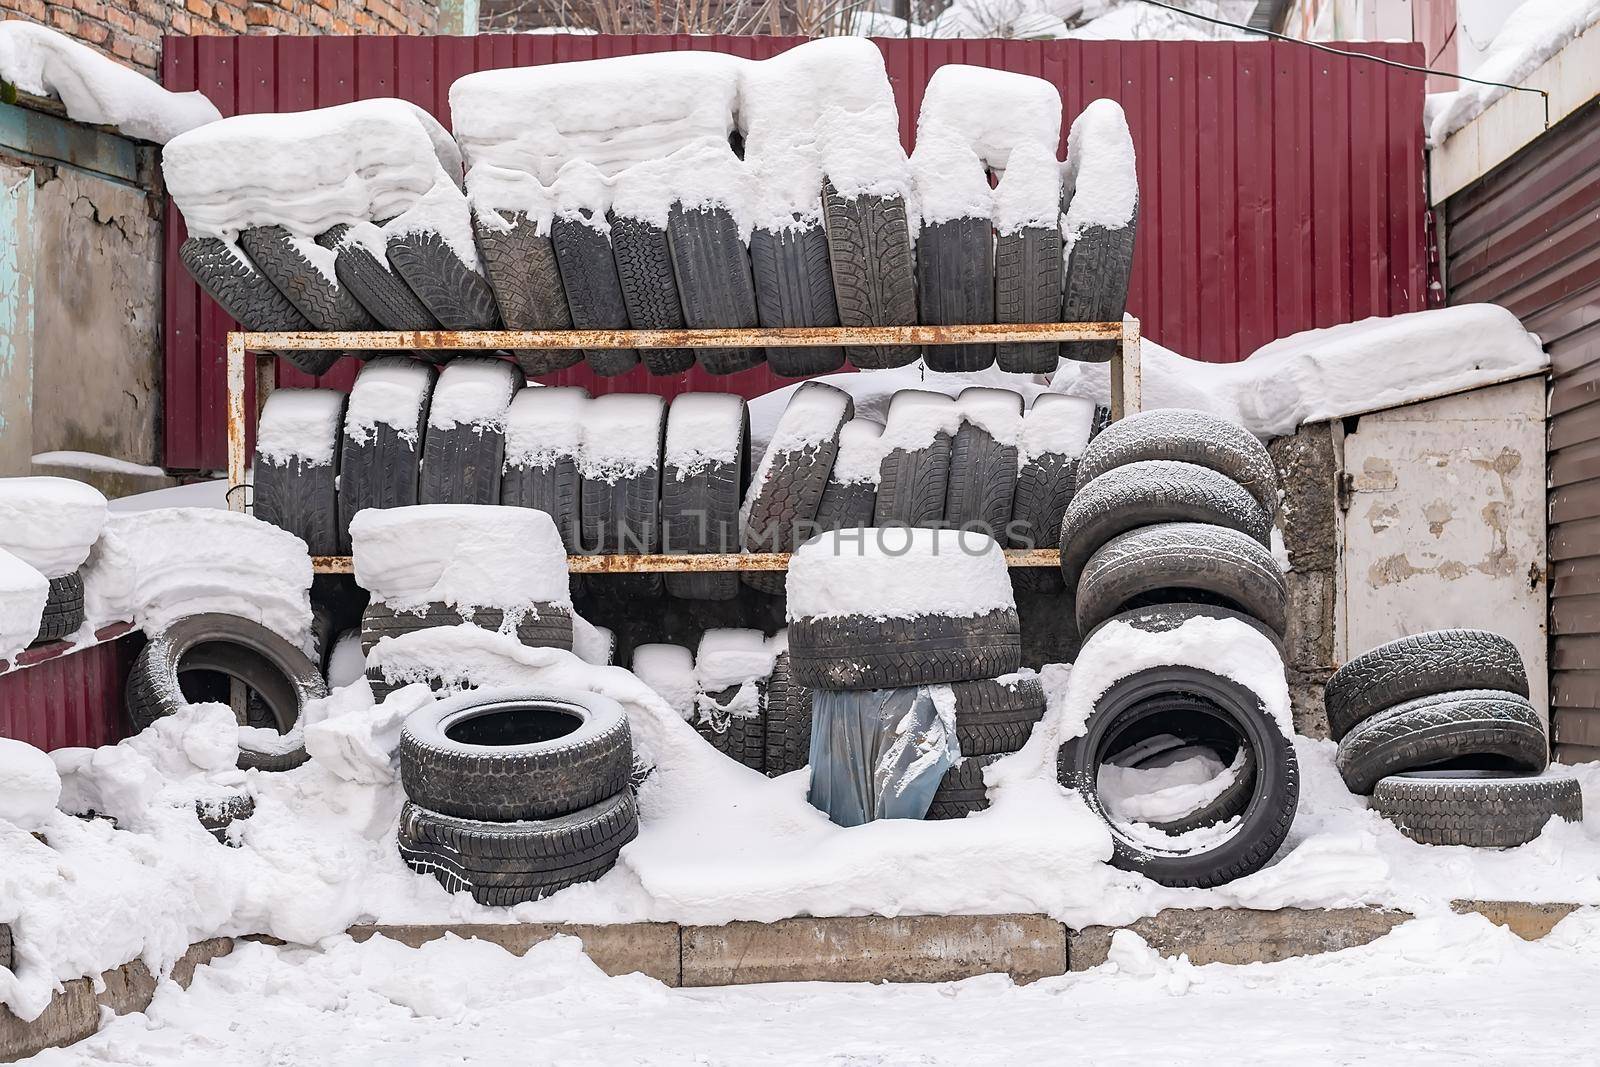 a lot of, a pile of worn-out, used car tires, tire wheels lie on a rack outdoor in the winter in the snow